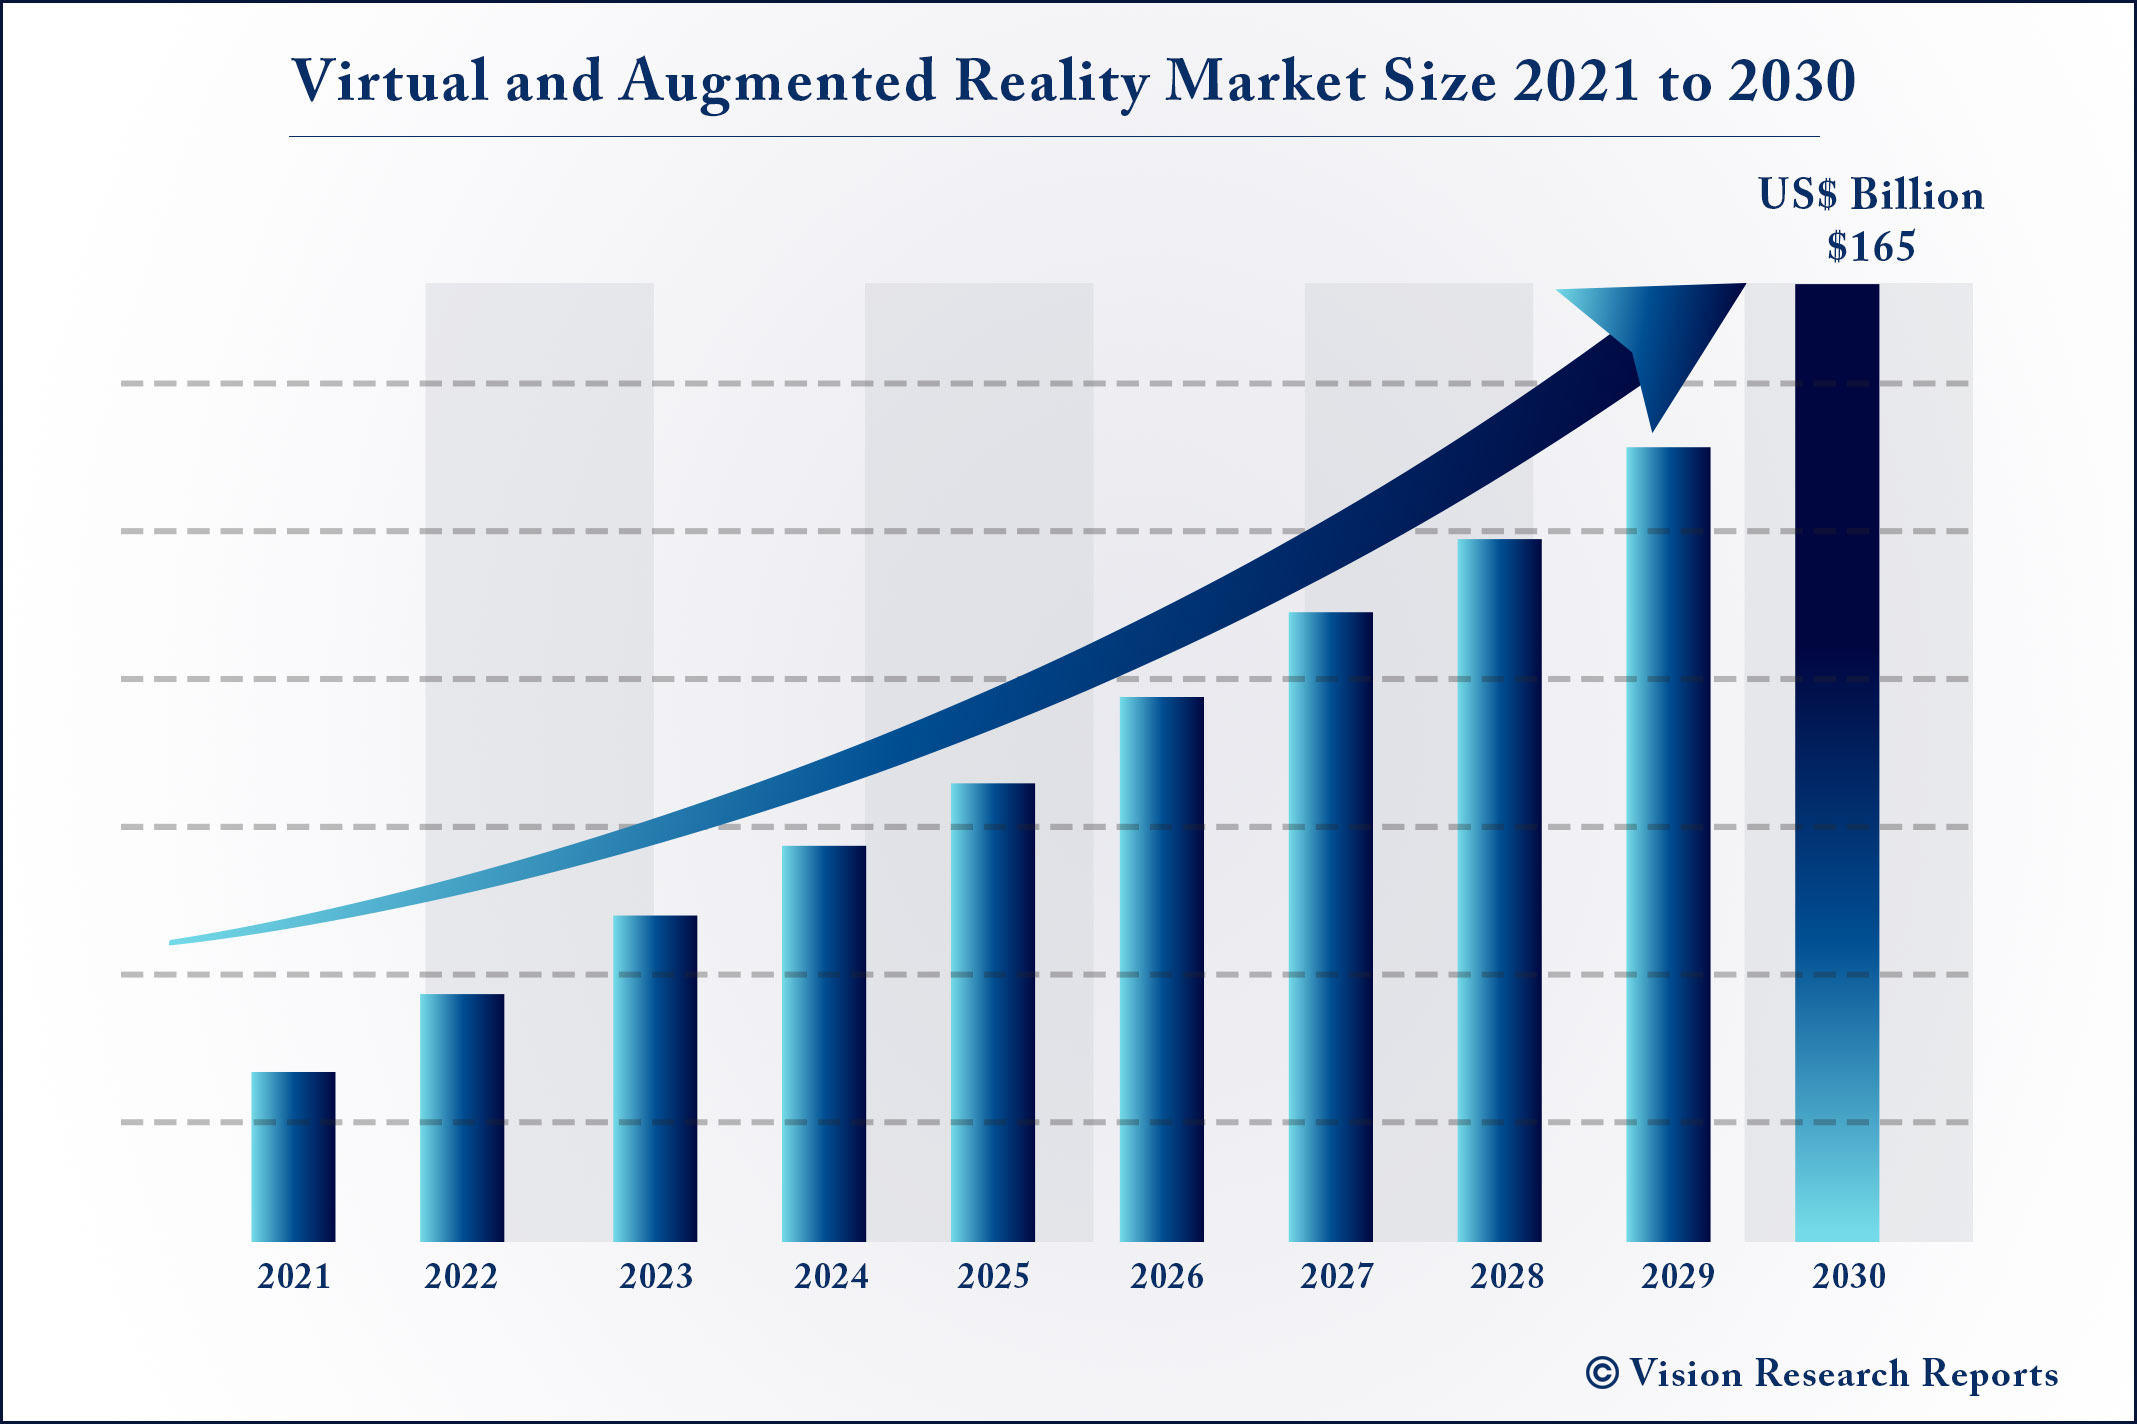 Virtual and Augmented Reality Market Size 2021 to 2030